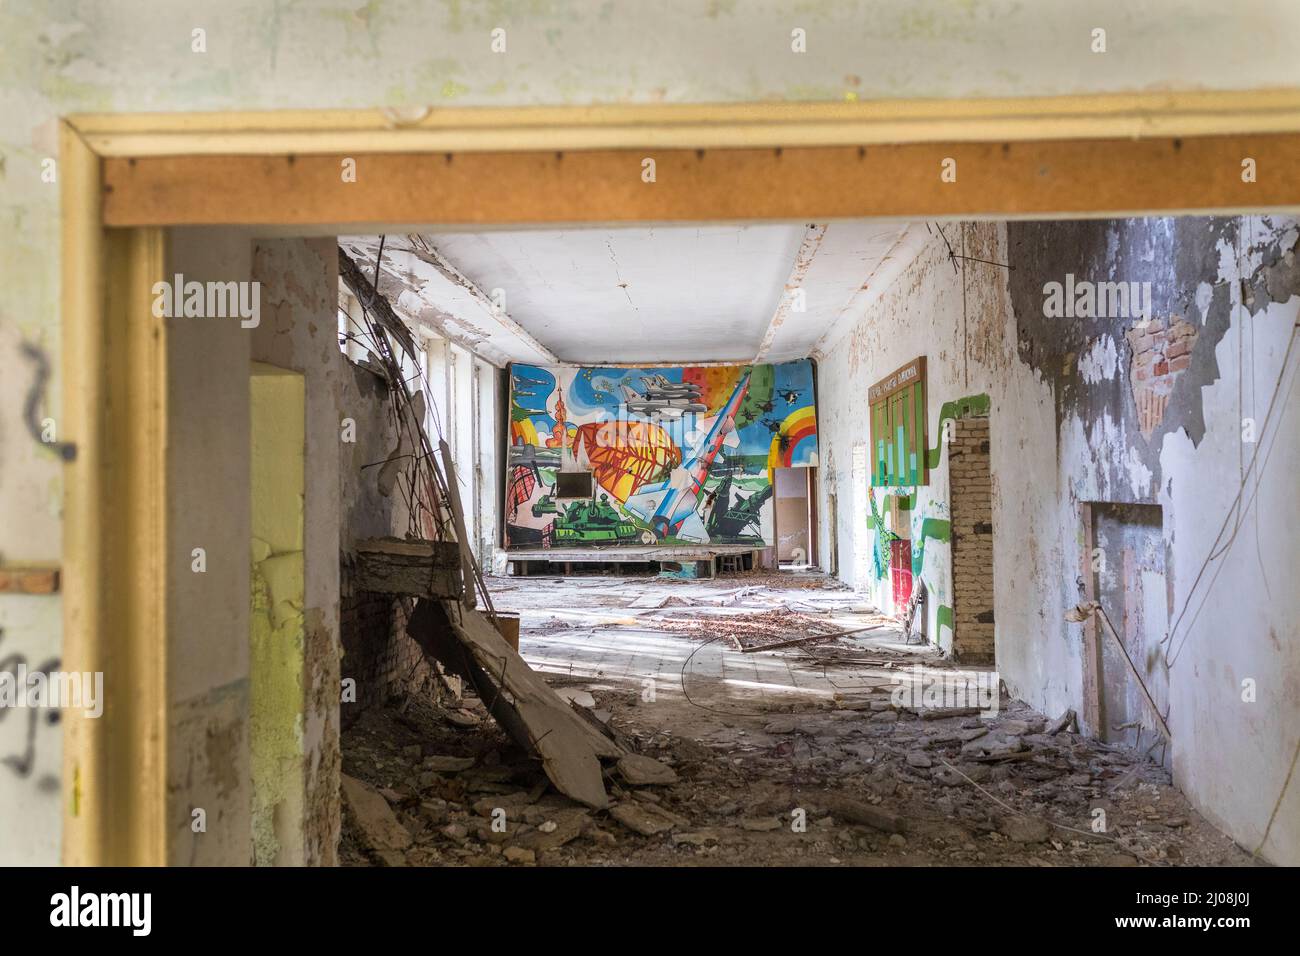 Propaganda mural art in decaying abandoned Russian army barracks in East Germany GDR Stock Photo